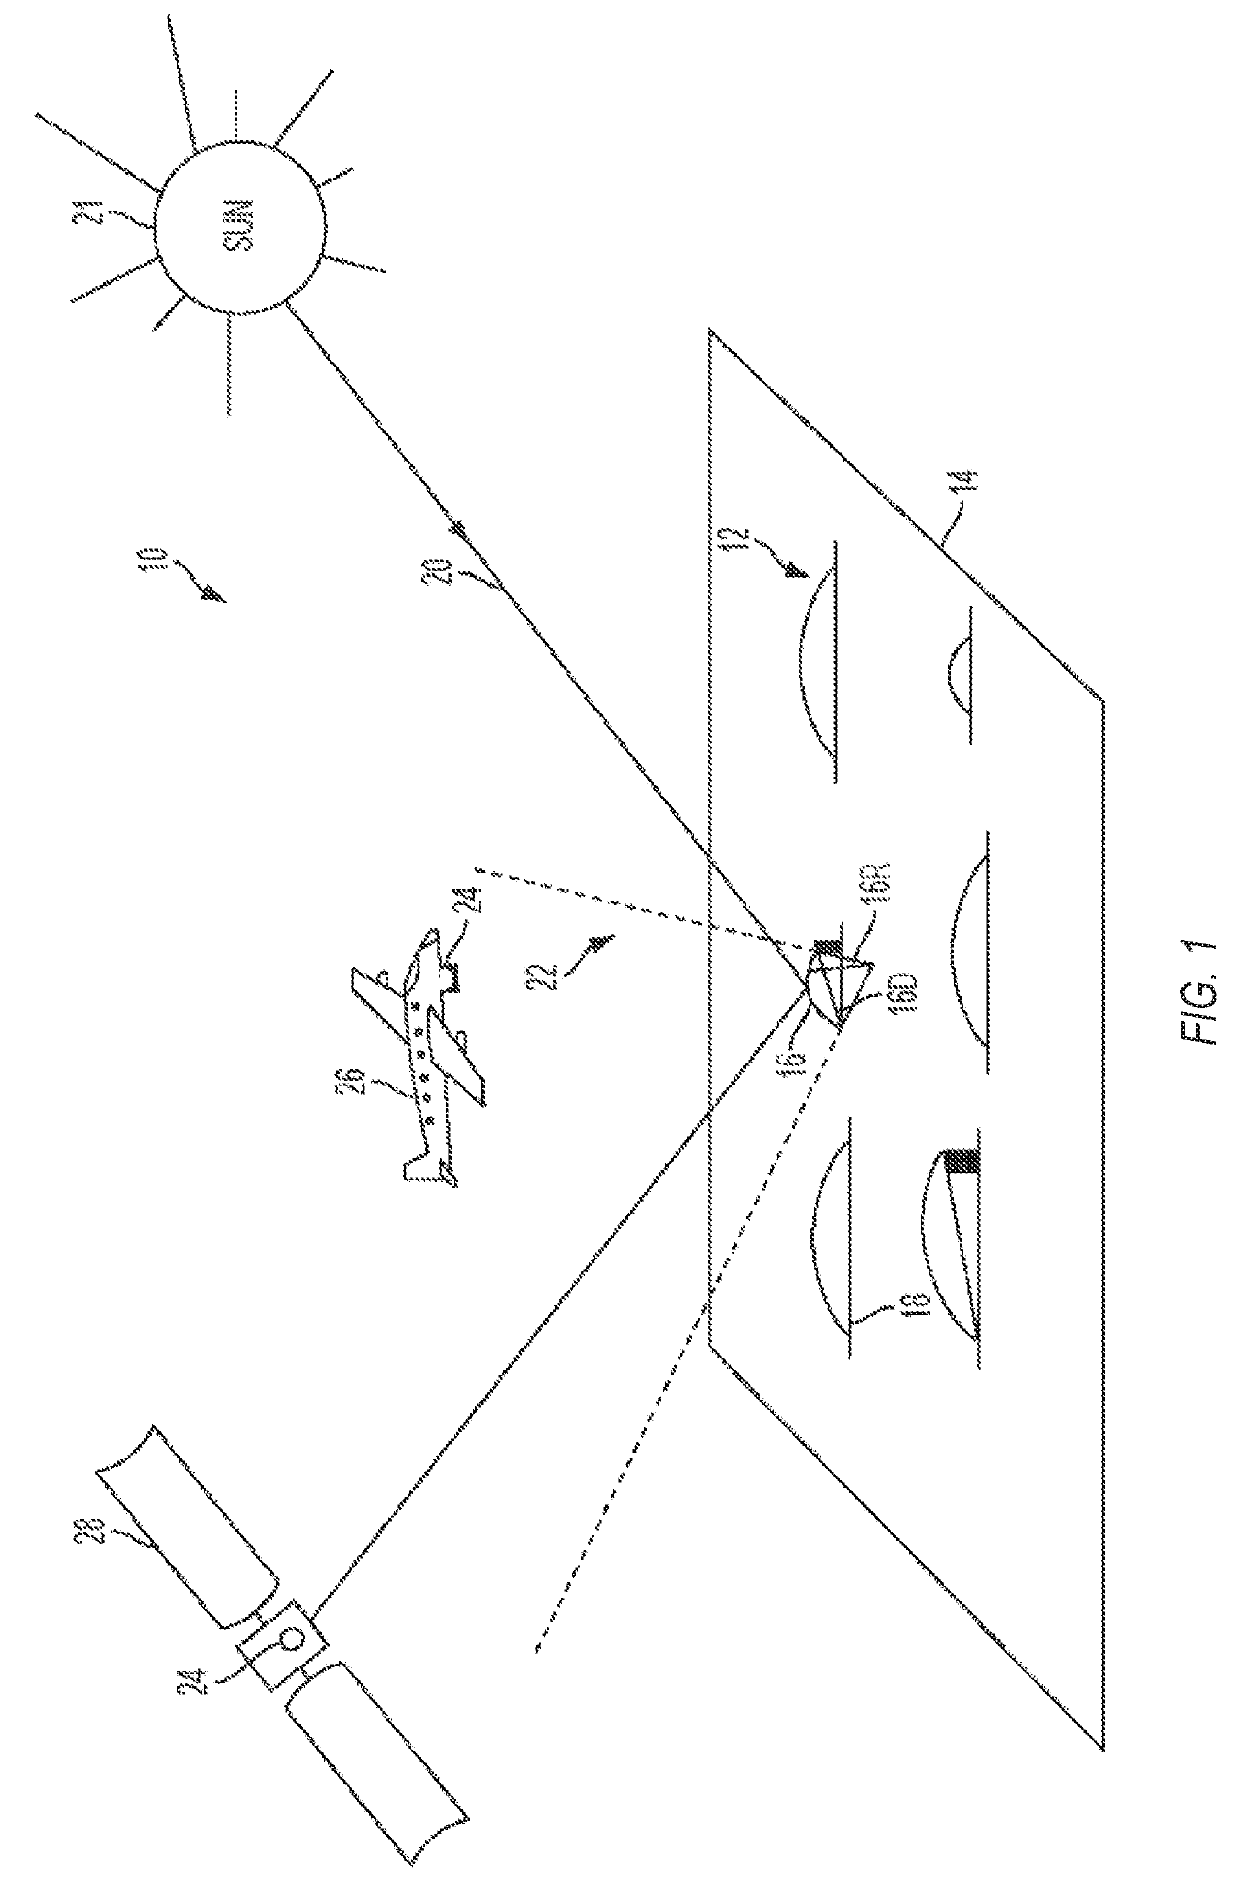 Spatial radiometric correction of an optical system having a color filter mosaic